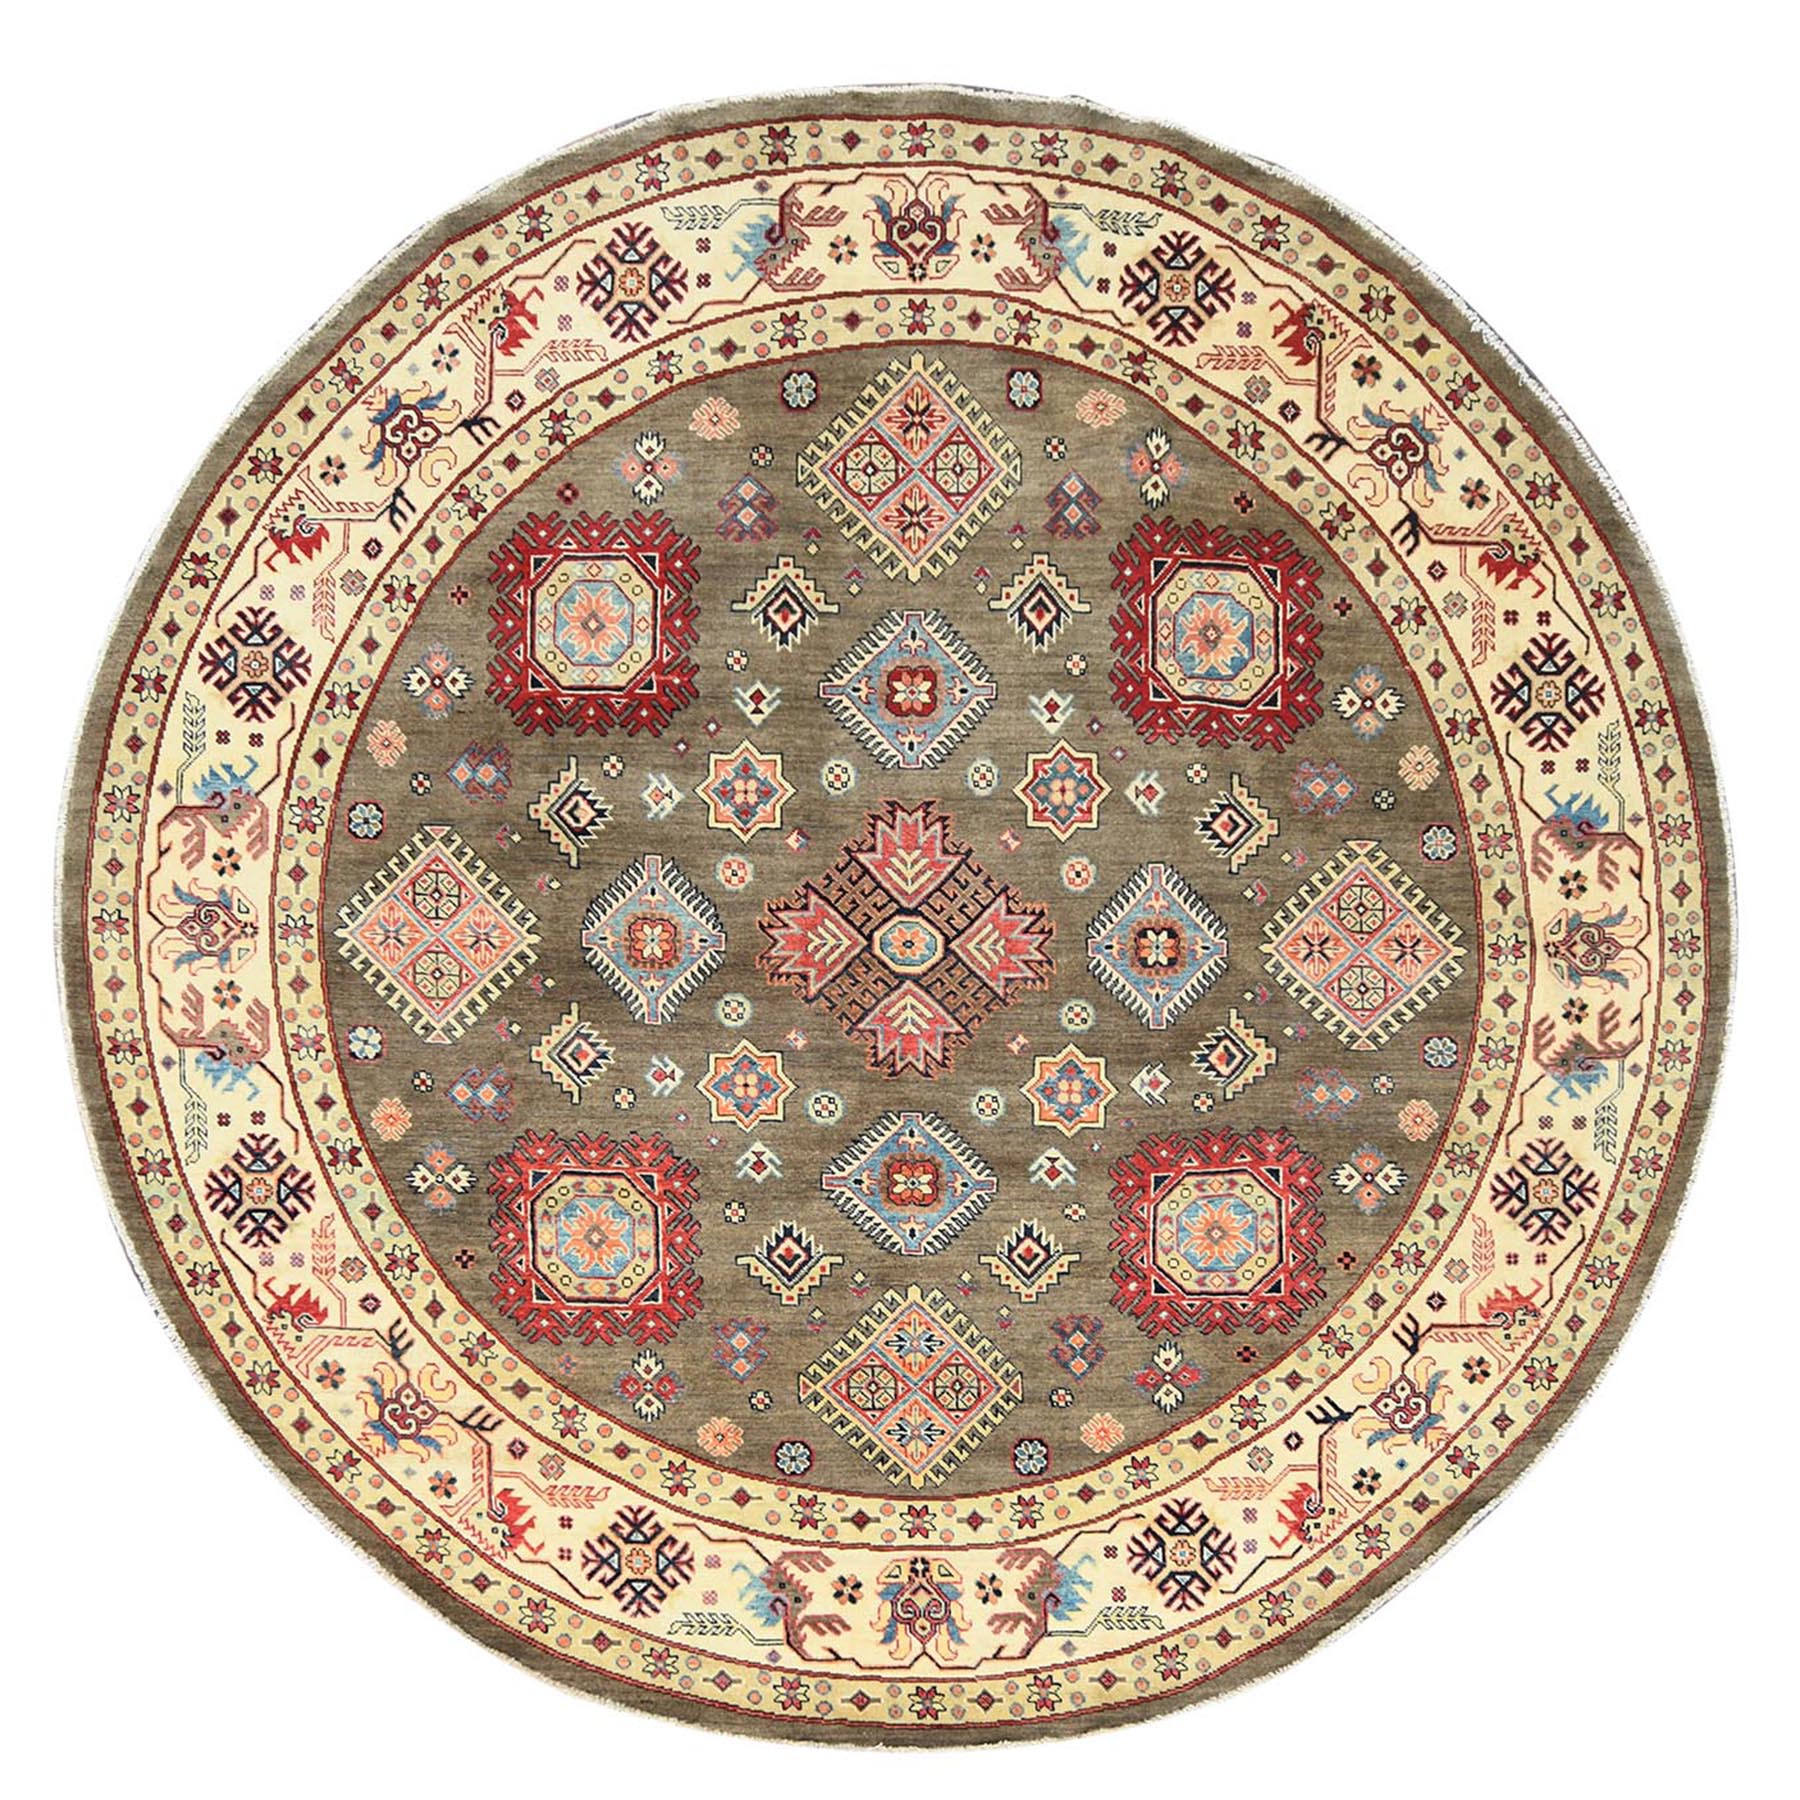  Wool Hand-Knotted Area Rug 8'10